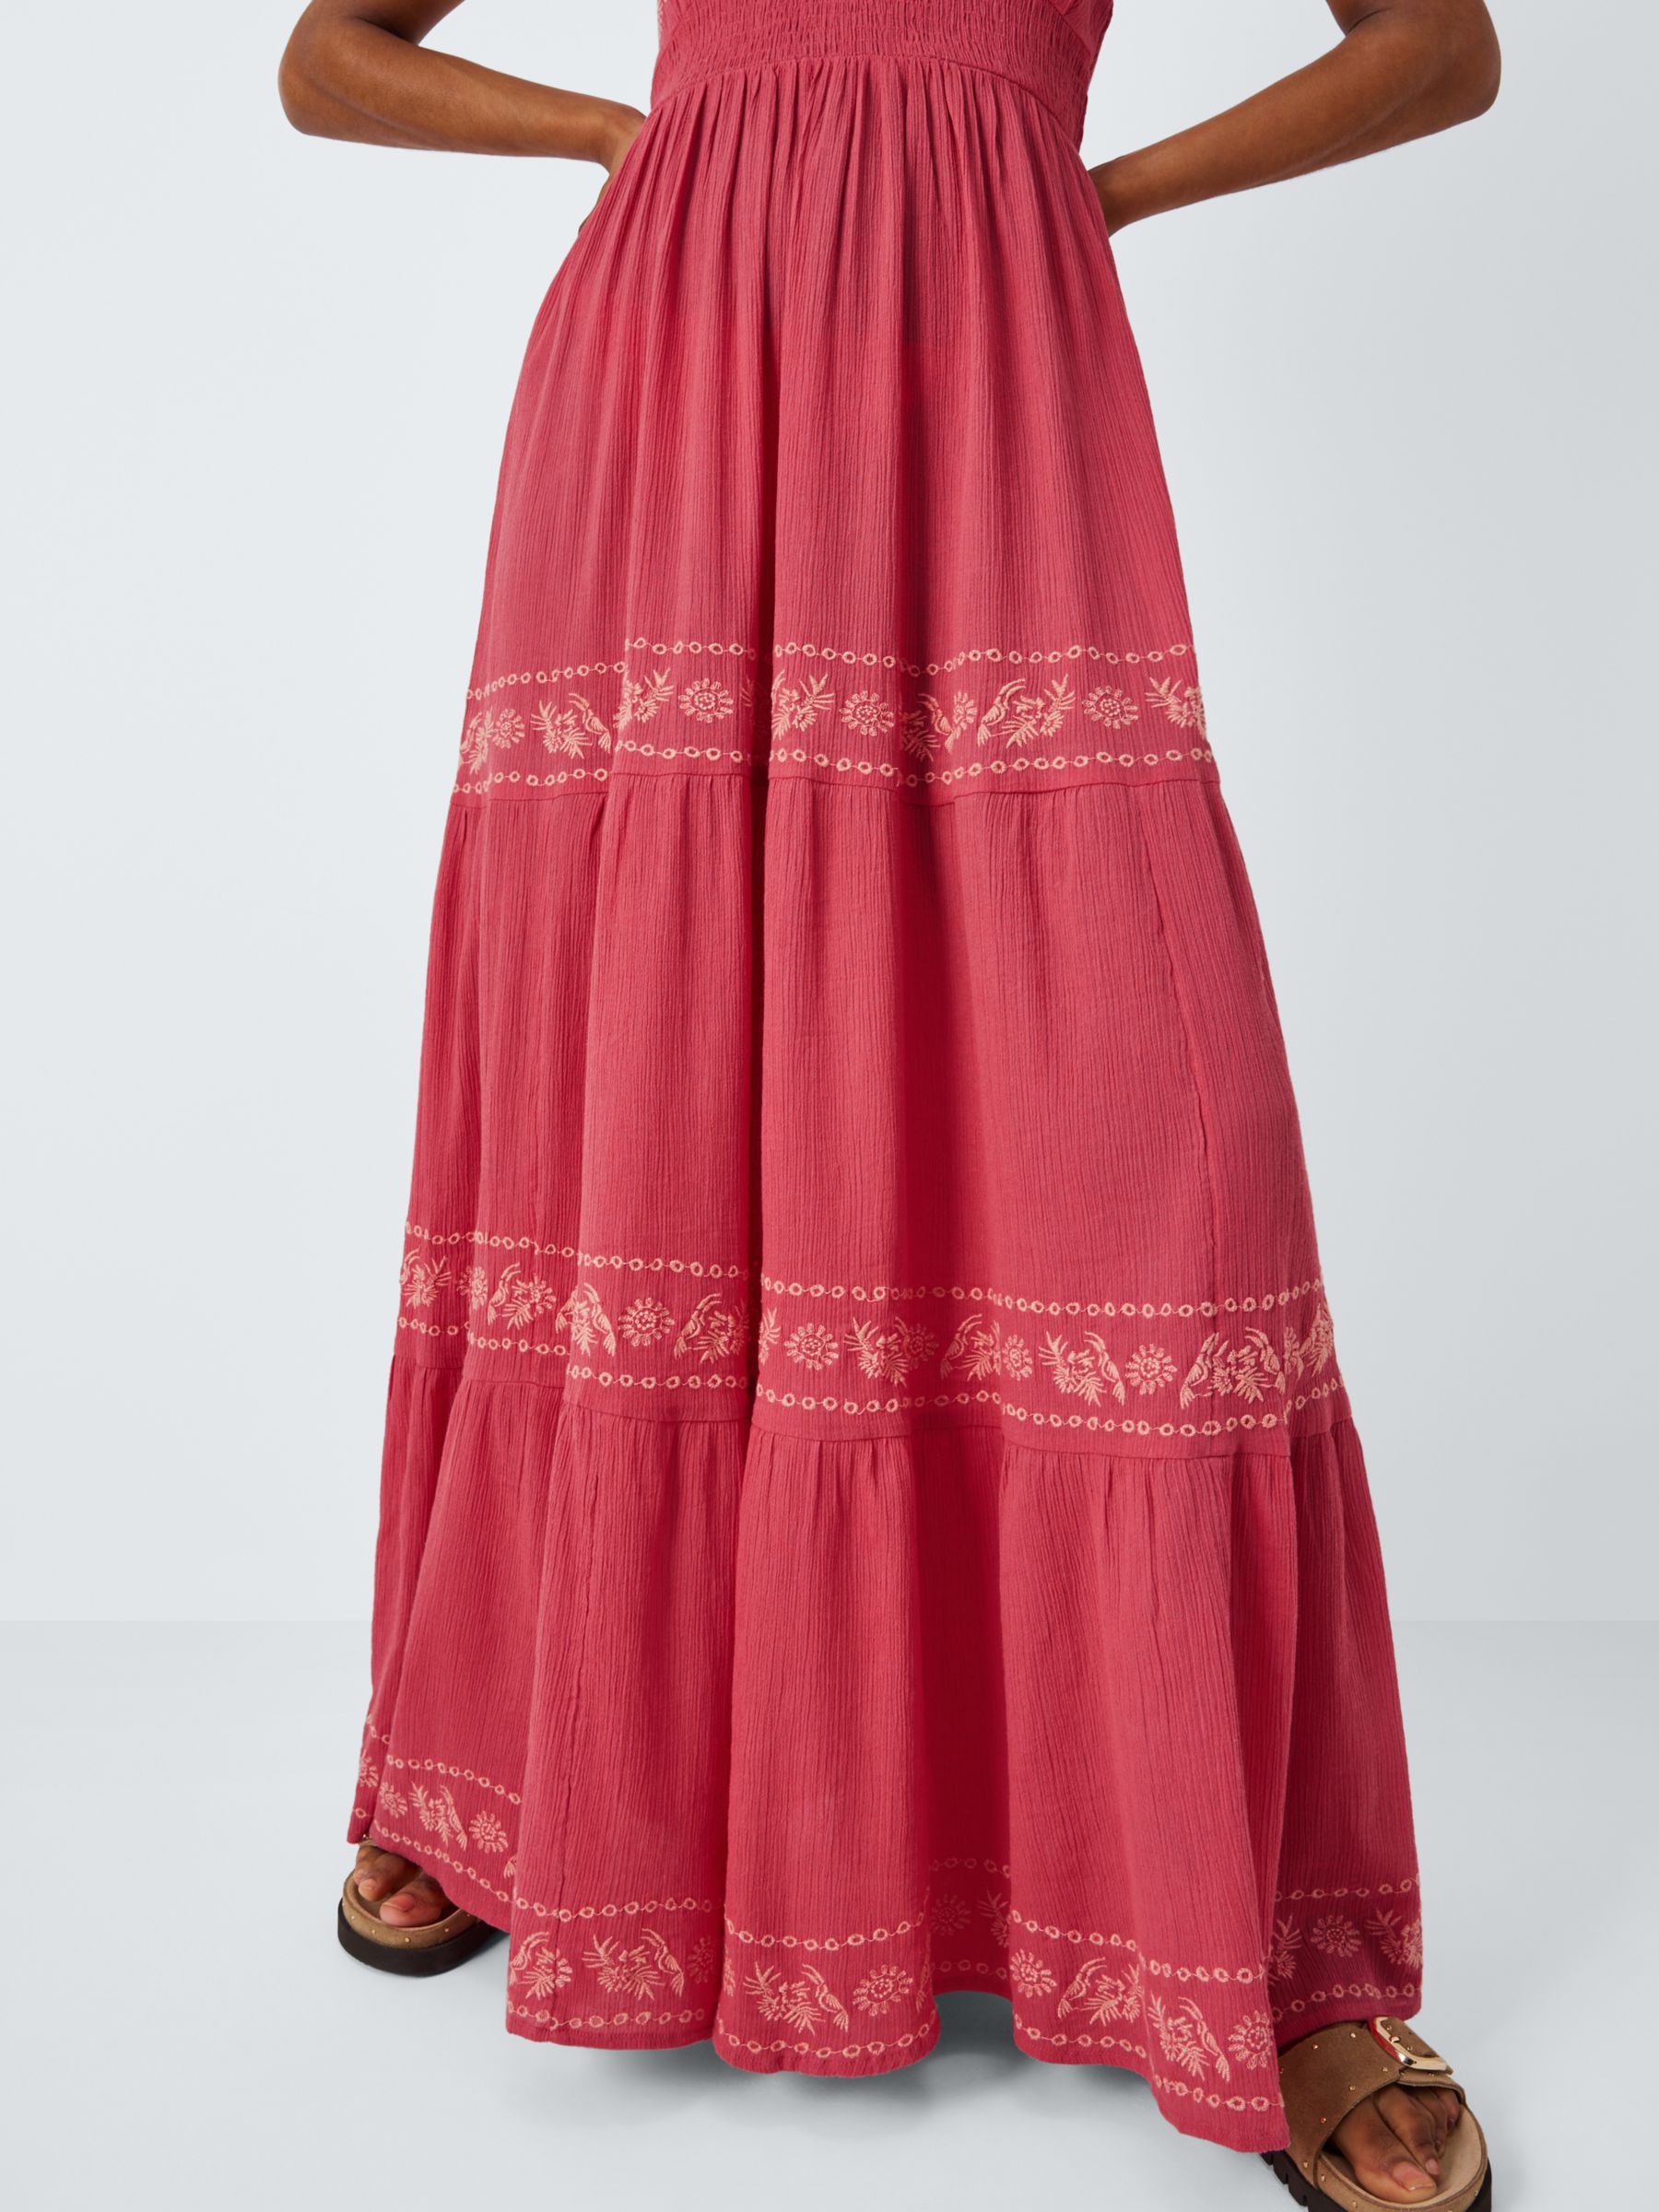 AND/OR Tropic Embroidered Maxi Dress, Pink, S